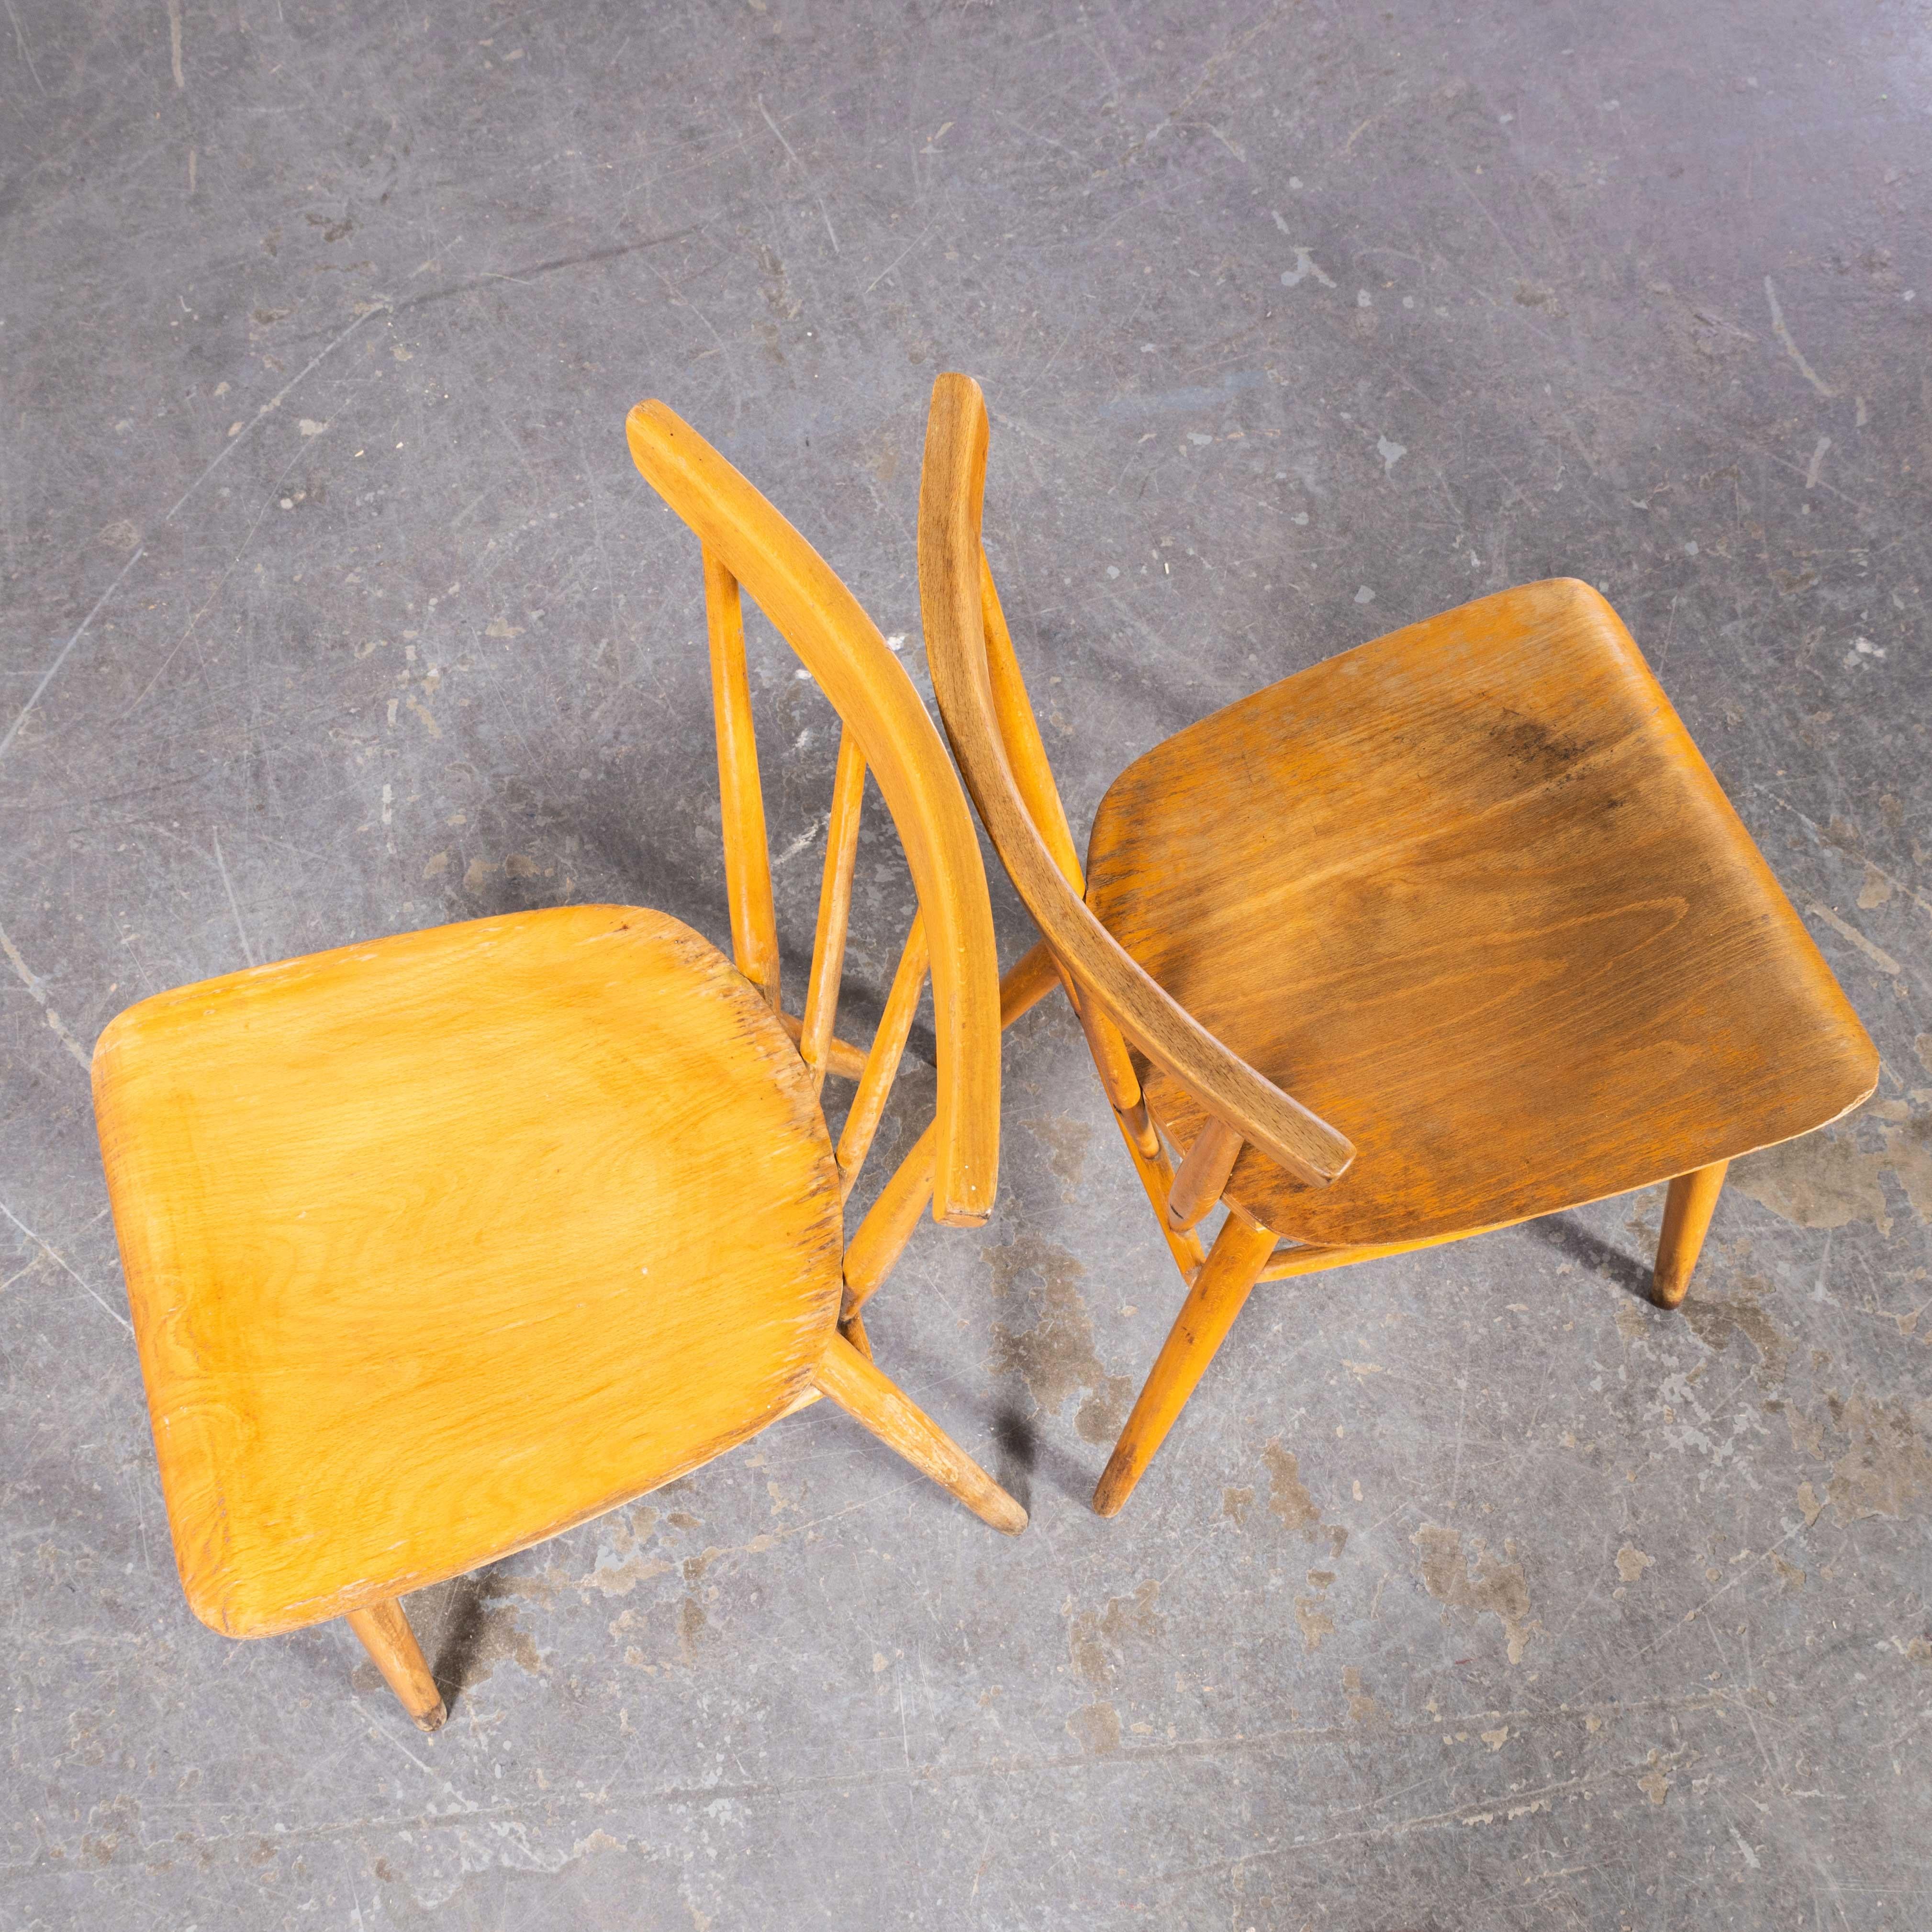 1950s Classic Elegant Stickback Dining Chairs By Ton – Pair
1950s Classic Elegant Stickback Dining Chairs By Ton – Pair. These chairs were produced by the famous Czech firm Ton, a post war spin off from the famous Thonet factory that was carved up